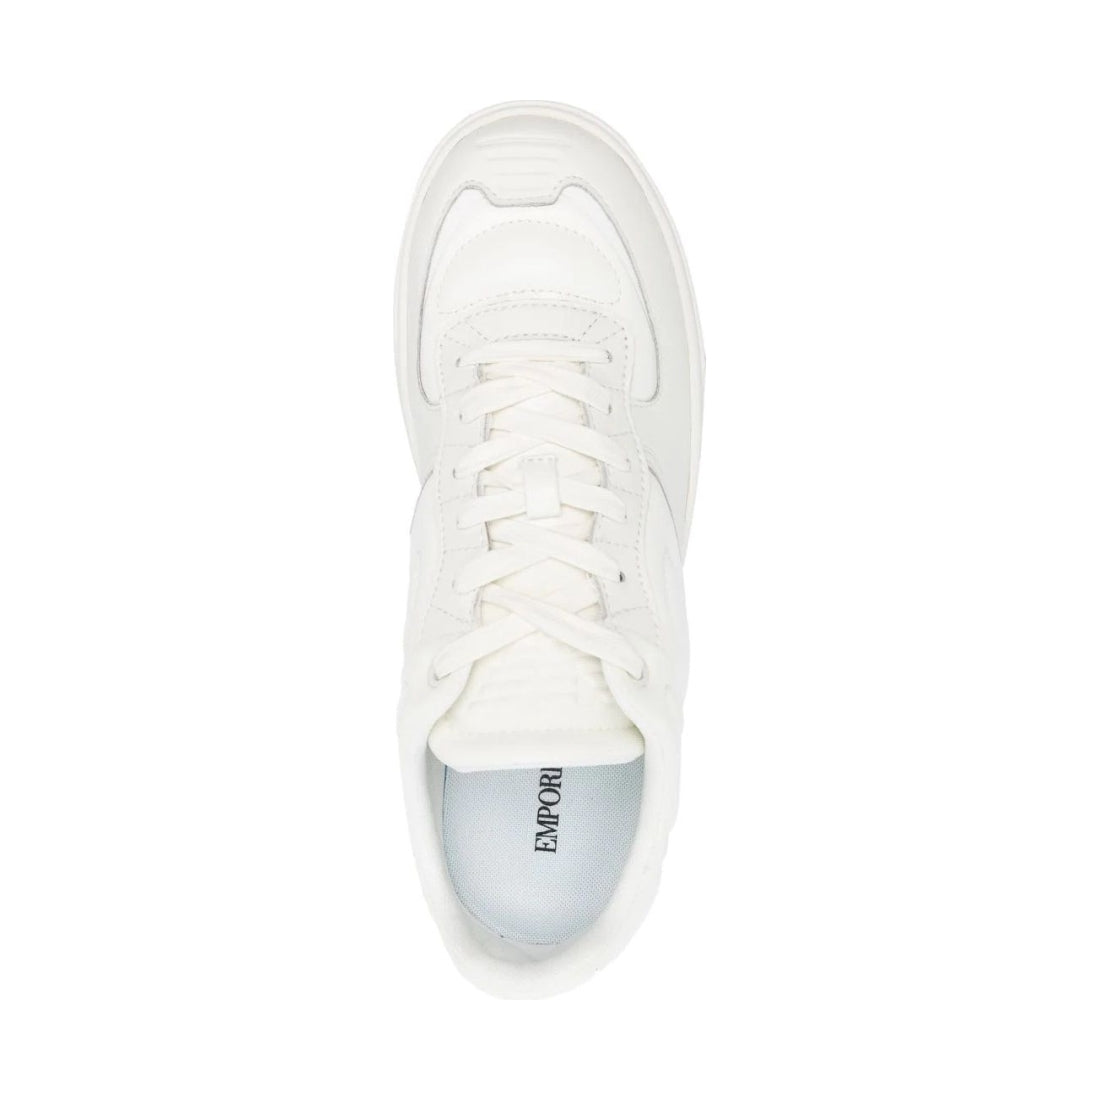 Emporio Armani mens off wh, off wh, off wh casual sneaker | Vilbury London